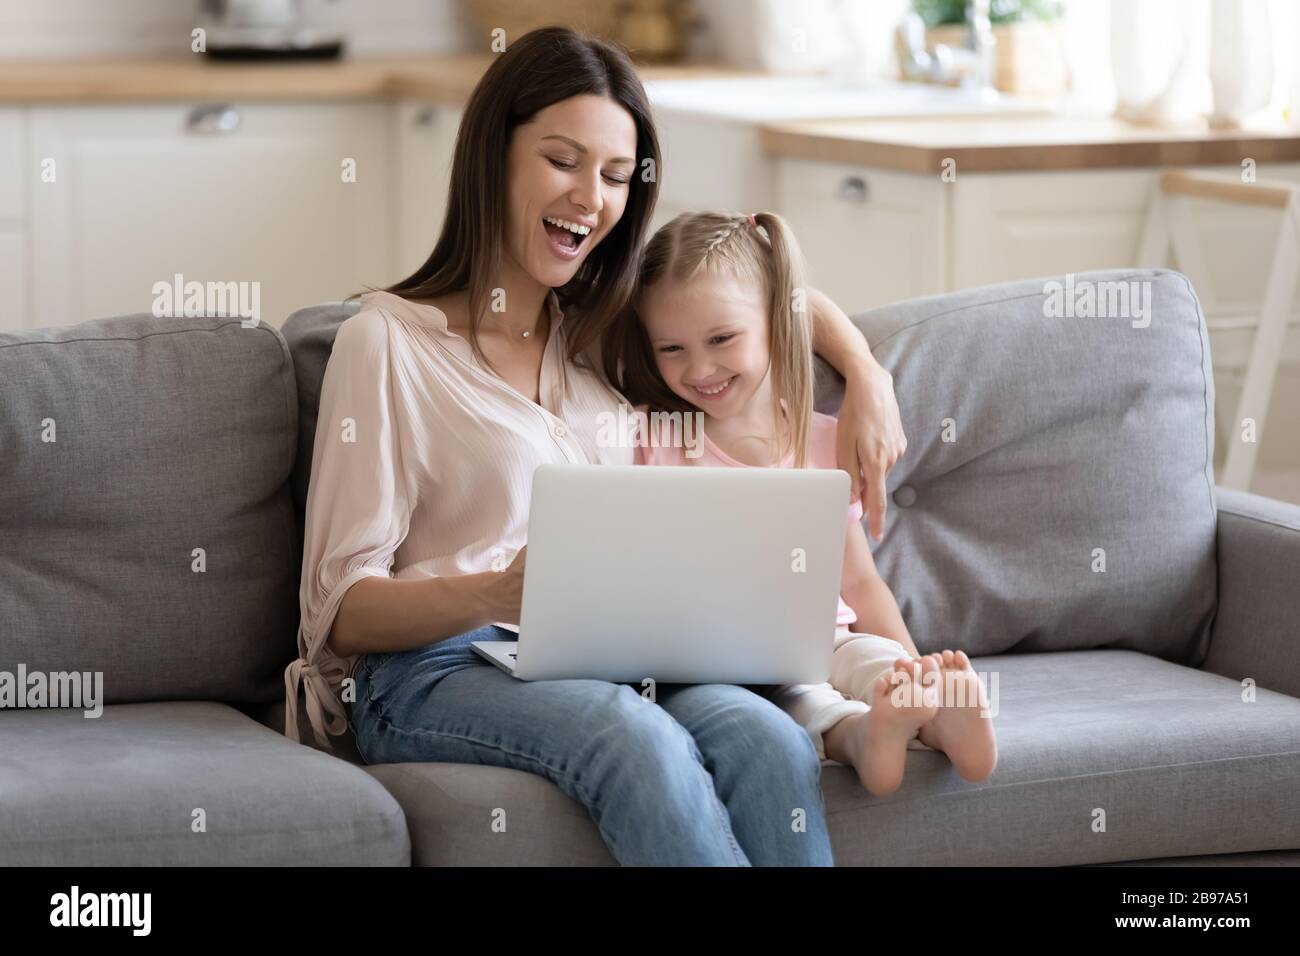 Overjoyed mom and daughter watch funny video on laptop Stock Photo - Alamy